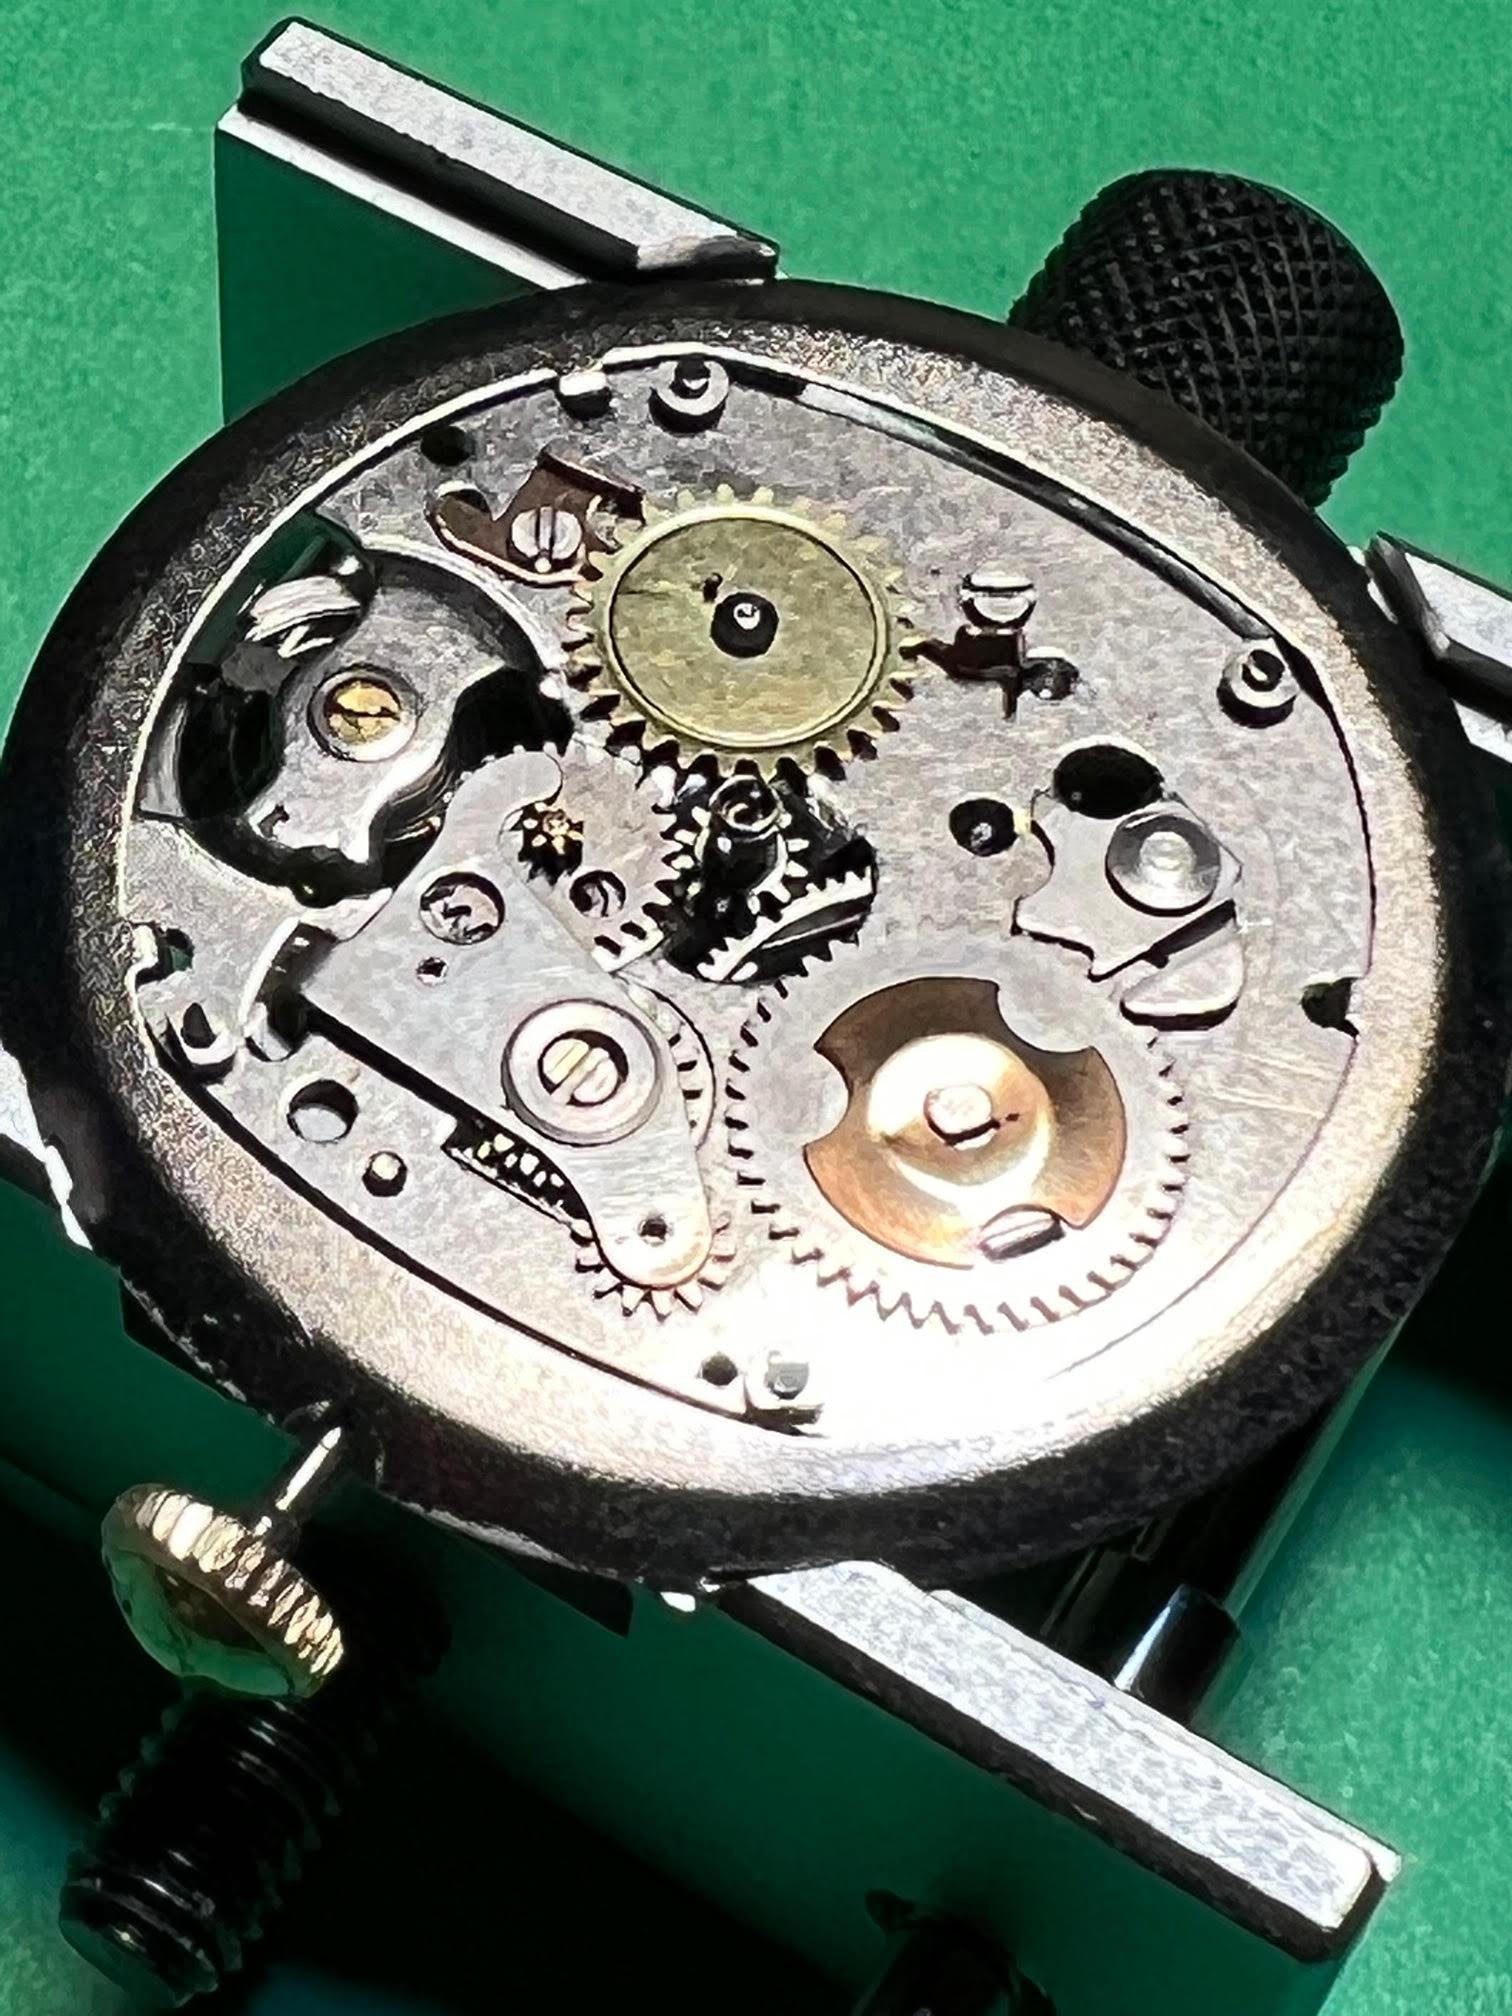 Problem with Timex M25 - binding in setting position with cannon pinion ...